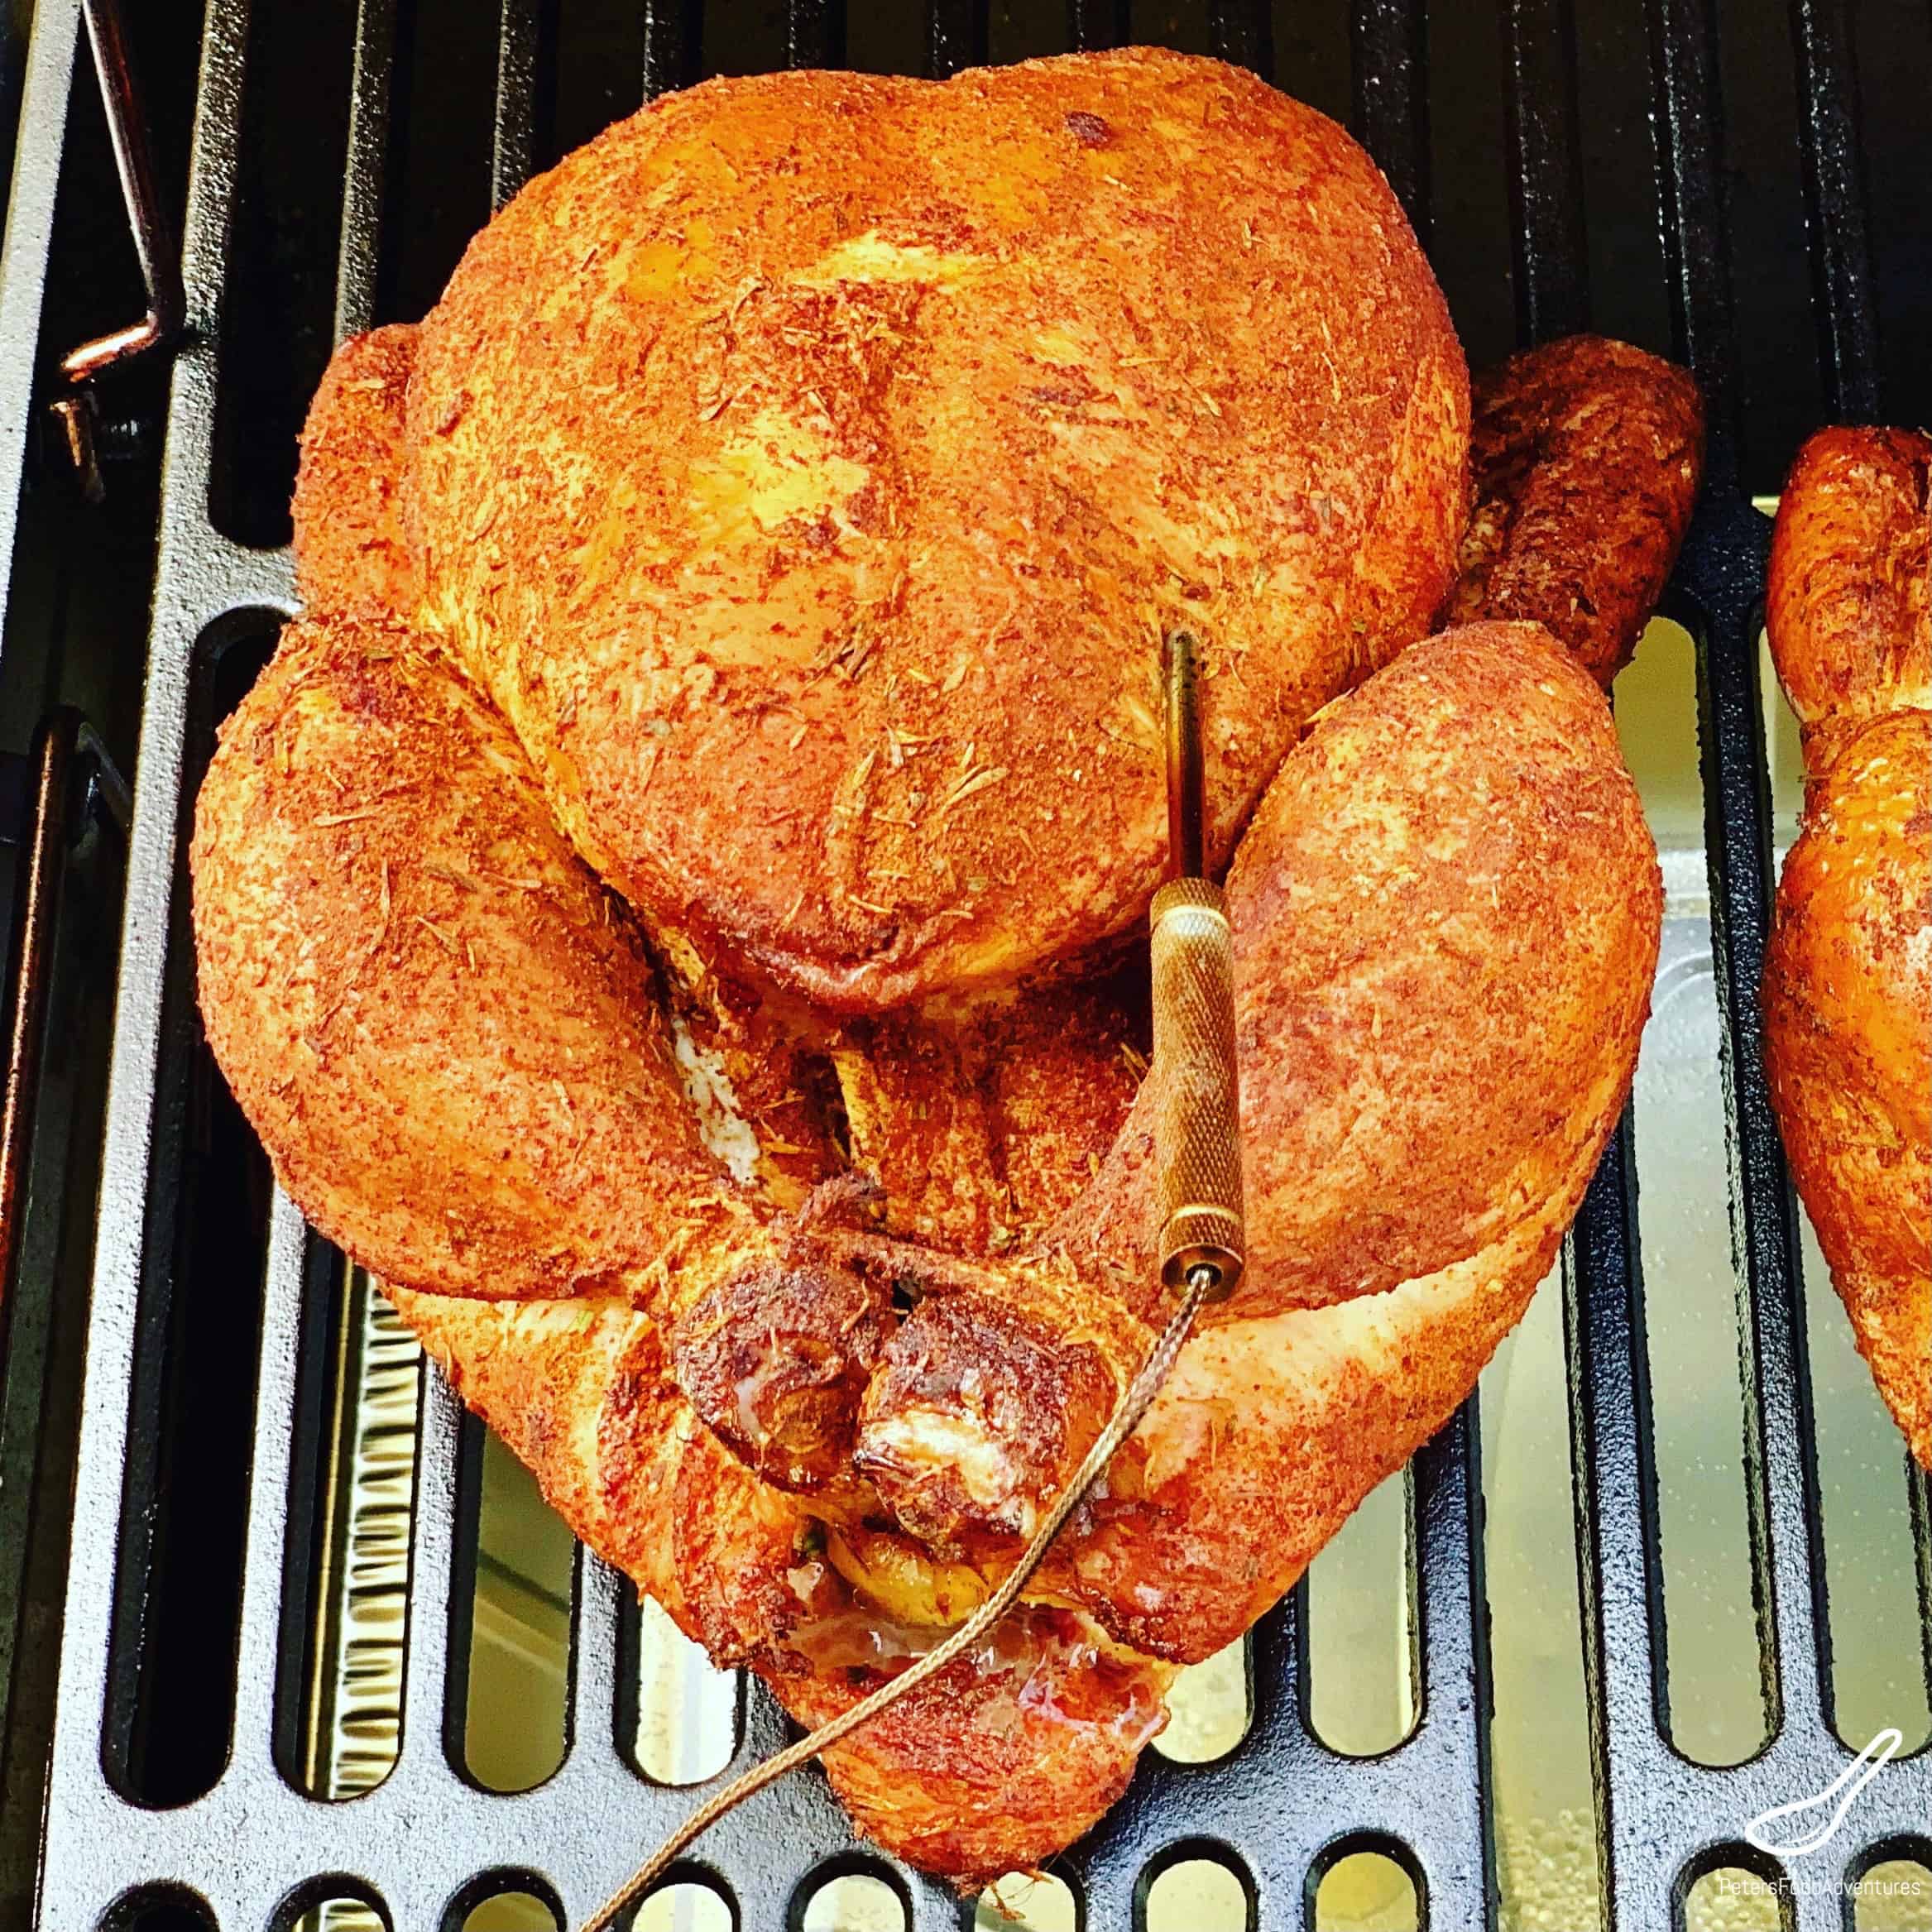 It's easier to smoke a chicken than you think! A wet or dry brine ensures the chicken is juicy and full of flavor. This recipe uses lump charcoal and fruit wood for the perfect smokey flavor. How to Smoke a Chicken